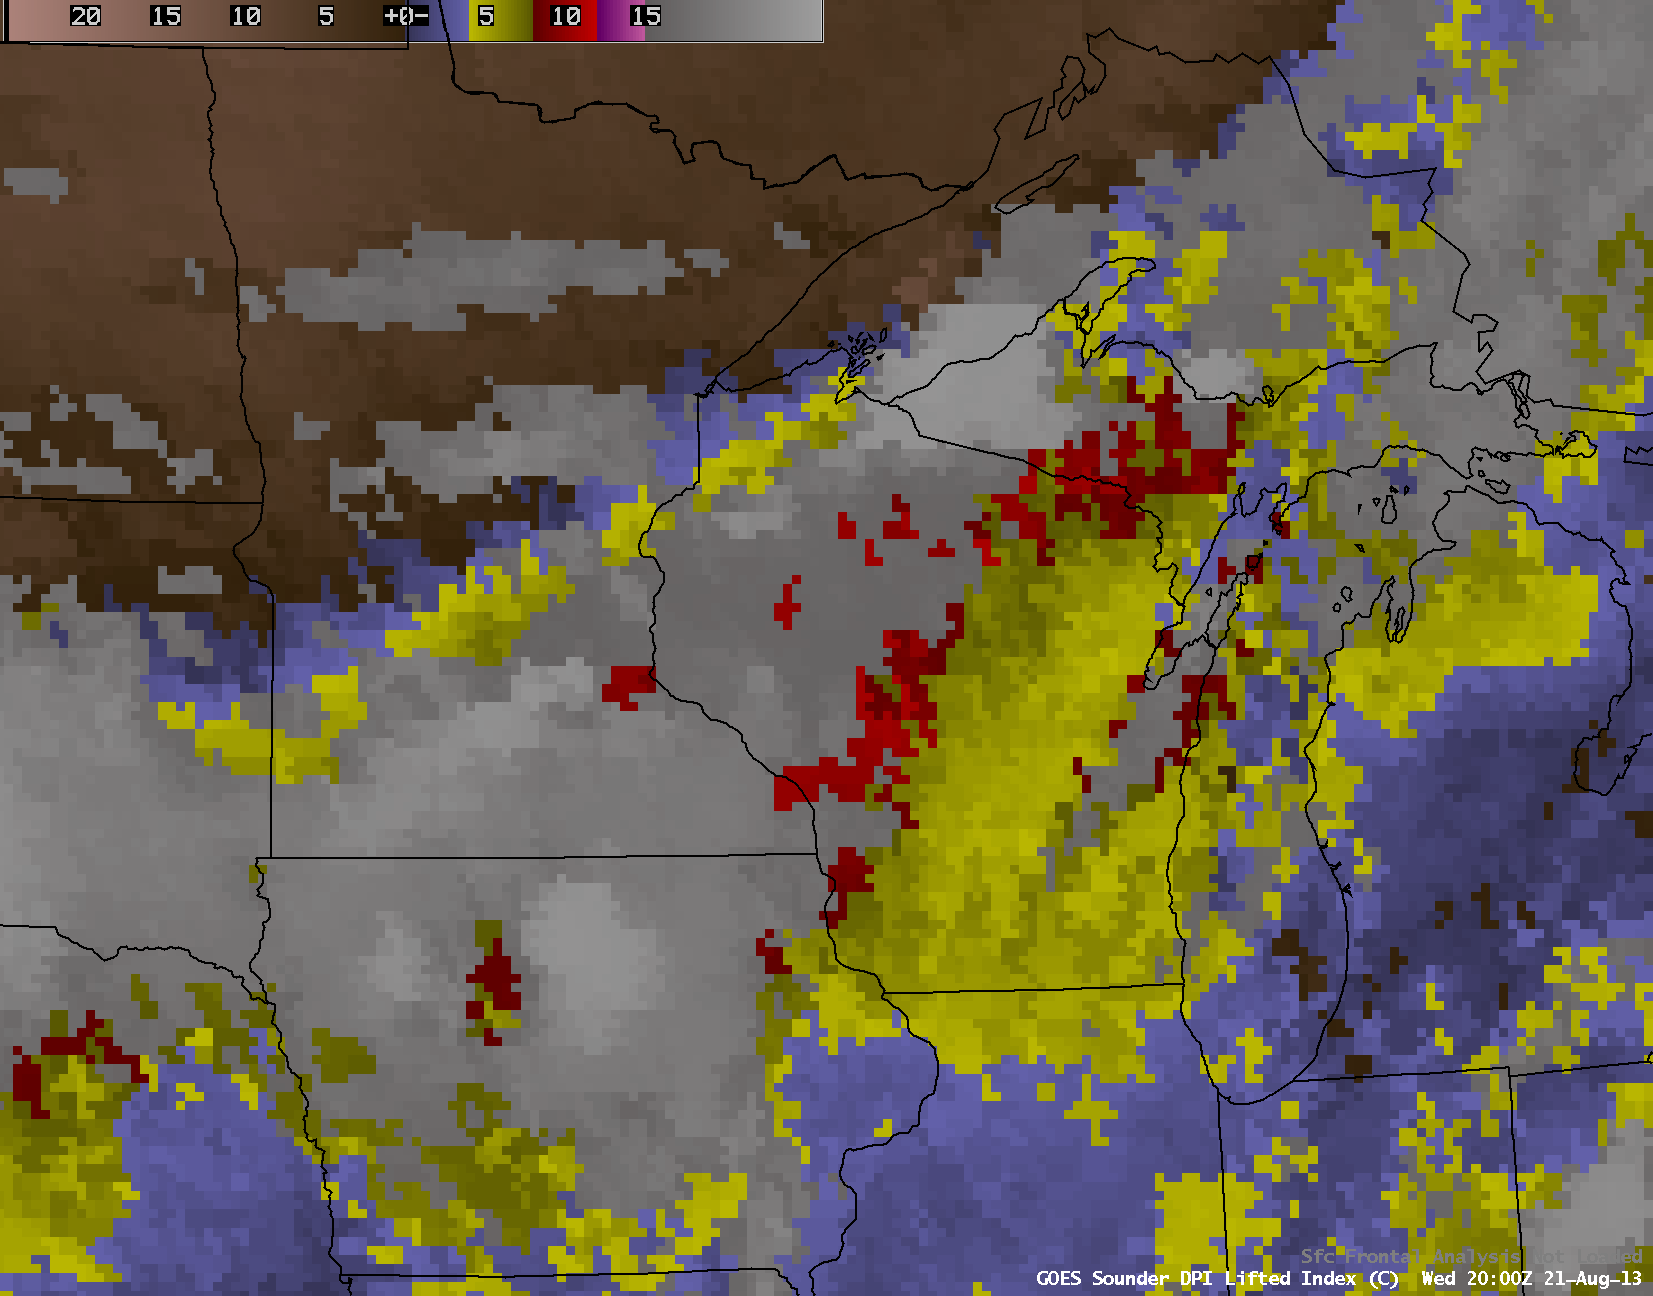 GOES-13 Sounder DPI values of Lifted Index (click image to play animation)